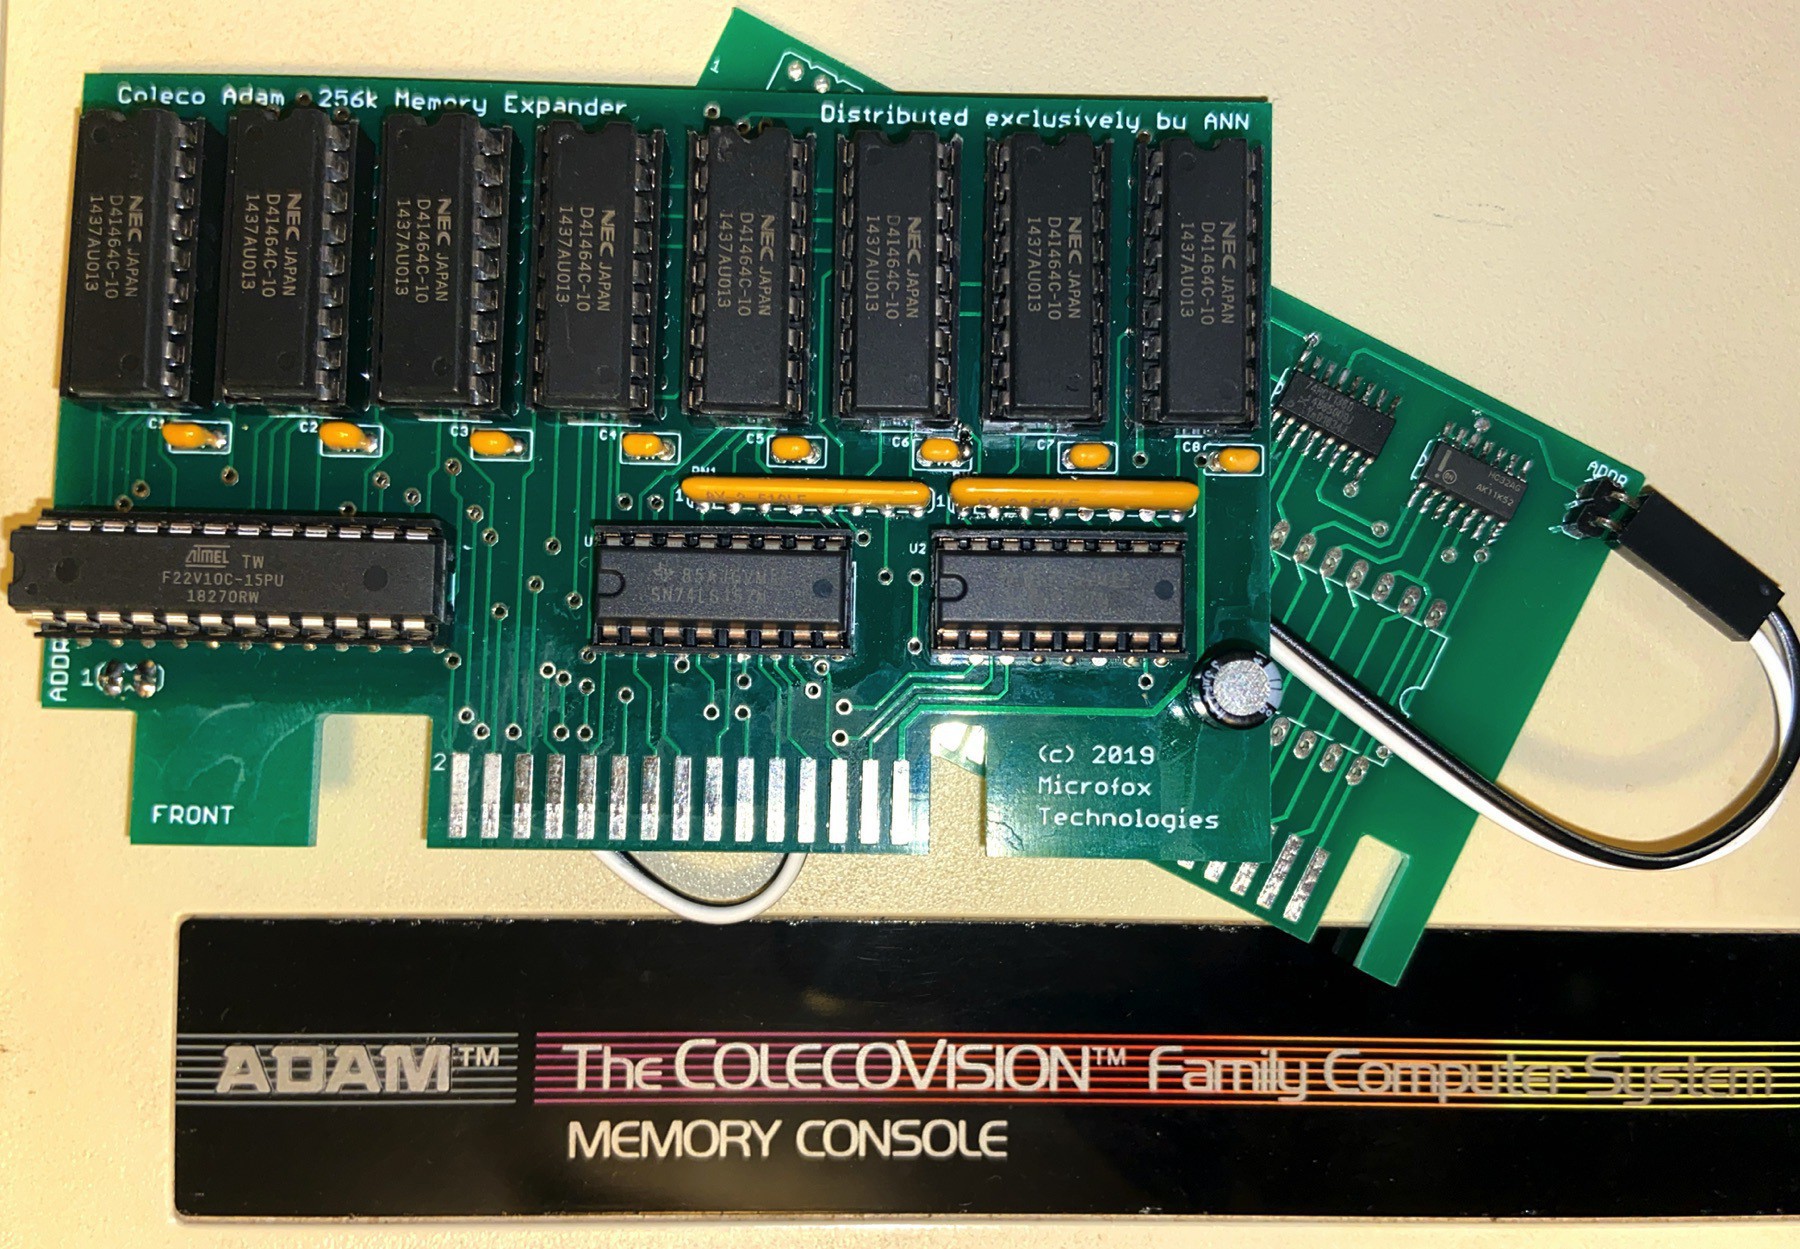 ADAM 256K Memory Expander (with connected addressor card).